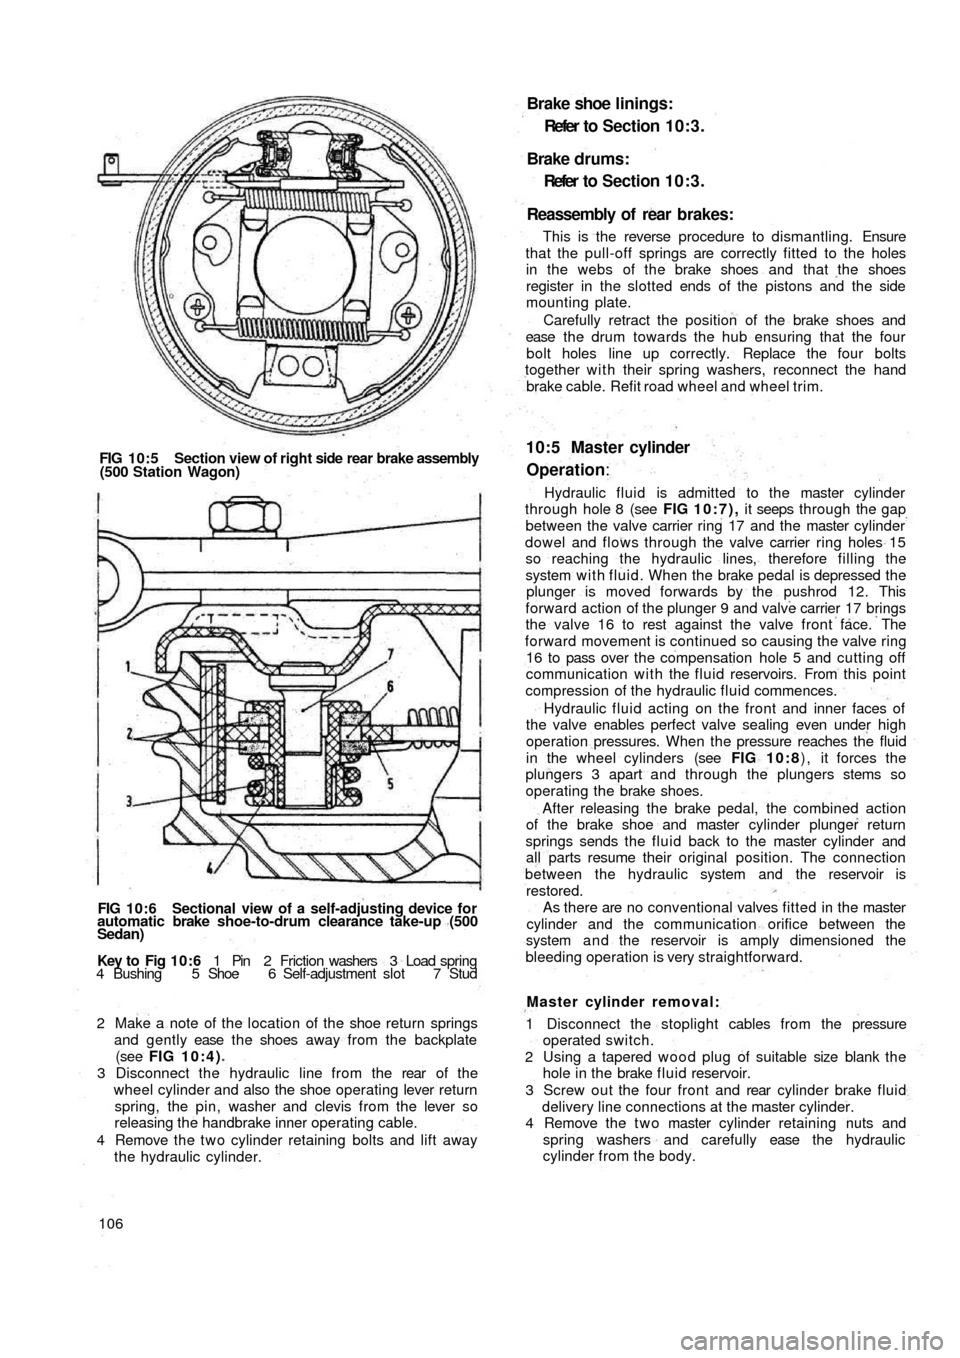 FIAT 500 1958 1.G Workshop Manual FIG 10:5 Section view of right side rear brake assembly
(500 Station Wagon)
FIG 10:6 Sectional view of a self-adjusting device for
automatic brake shoe-to-drum clearance take-up (500
Sedan)
Key  to   